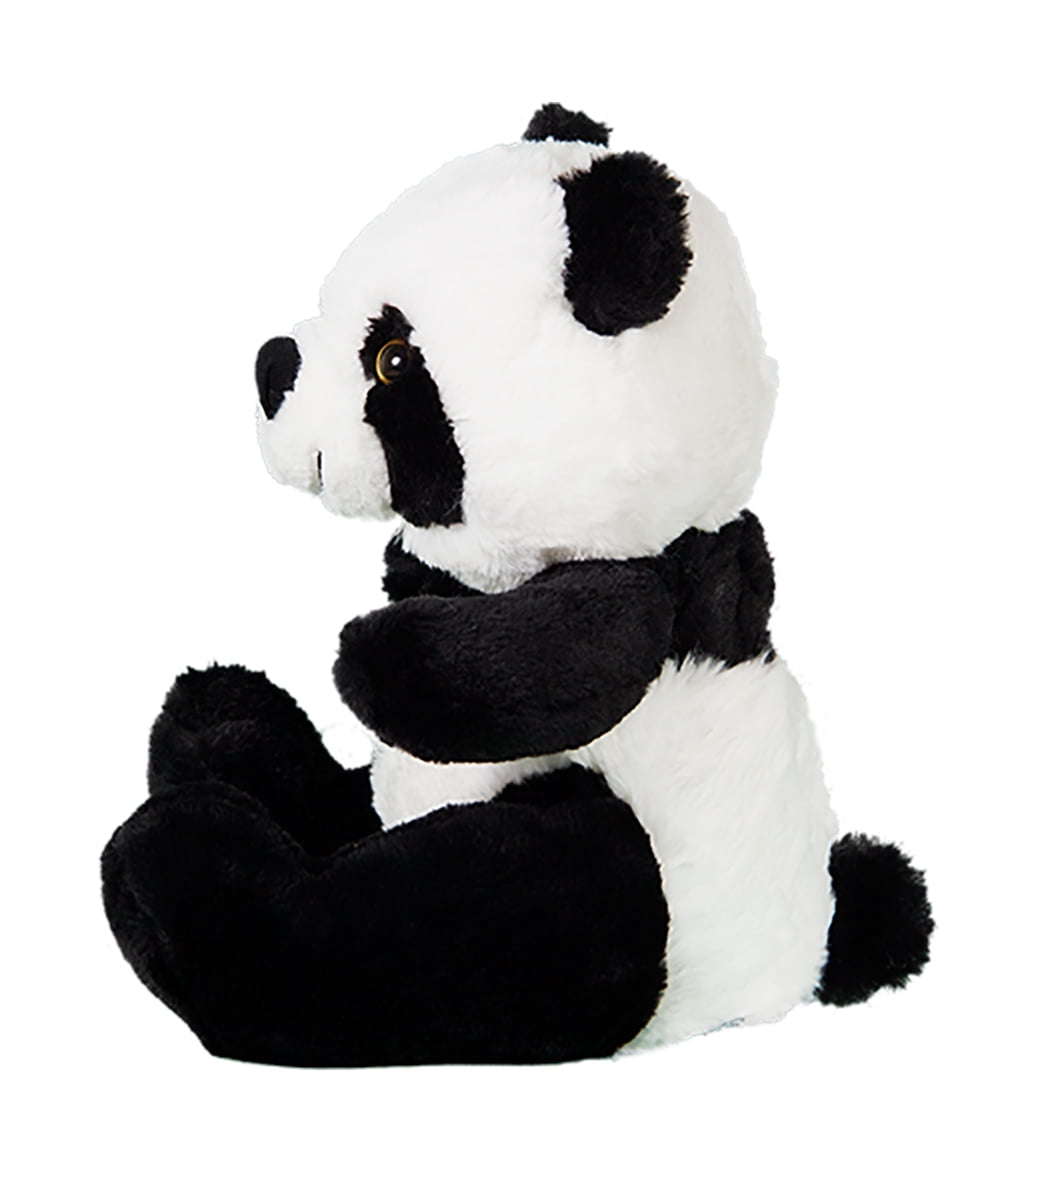 Ready 2 Love in a Few Easy Steps Record Your Own Plush 8 inch Pan the Panda 